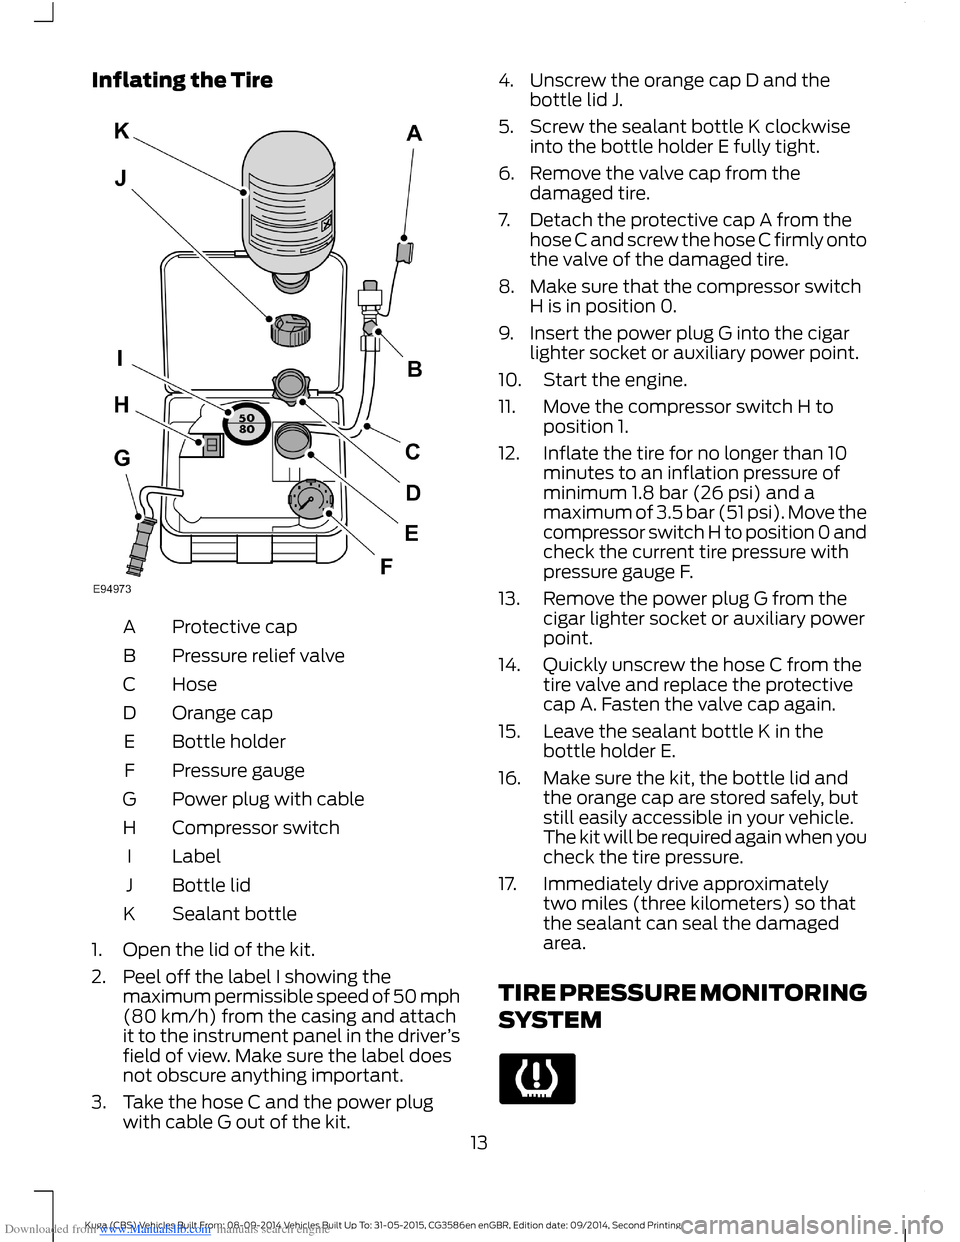 FORD KUGA 2015 2.G Owners Manual Downloaded from www.Manualslib.com manuals search engine Inflating the Tire
Protective capA
Pressure relief valveB
HoseC
Orange capD
Bottle holderE
Pressure gaugeF
Power plug with cableG
Compressor sw